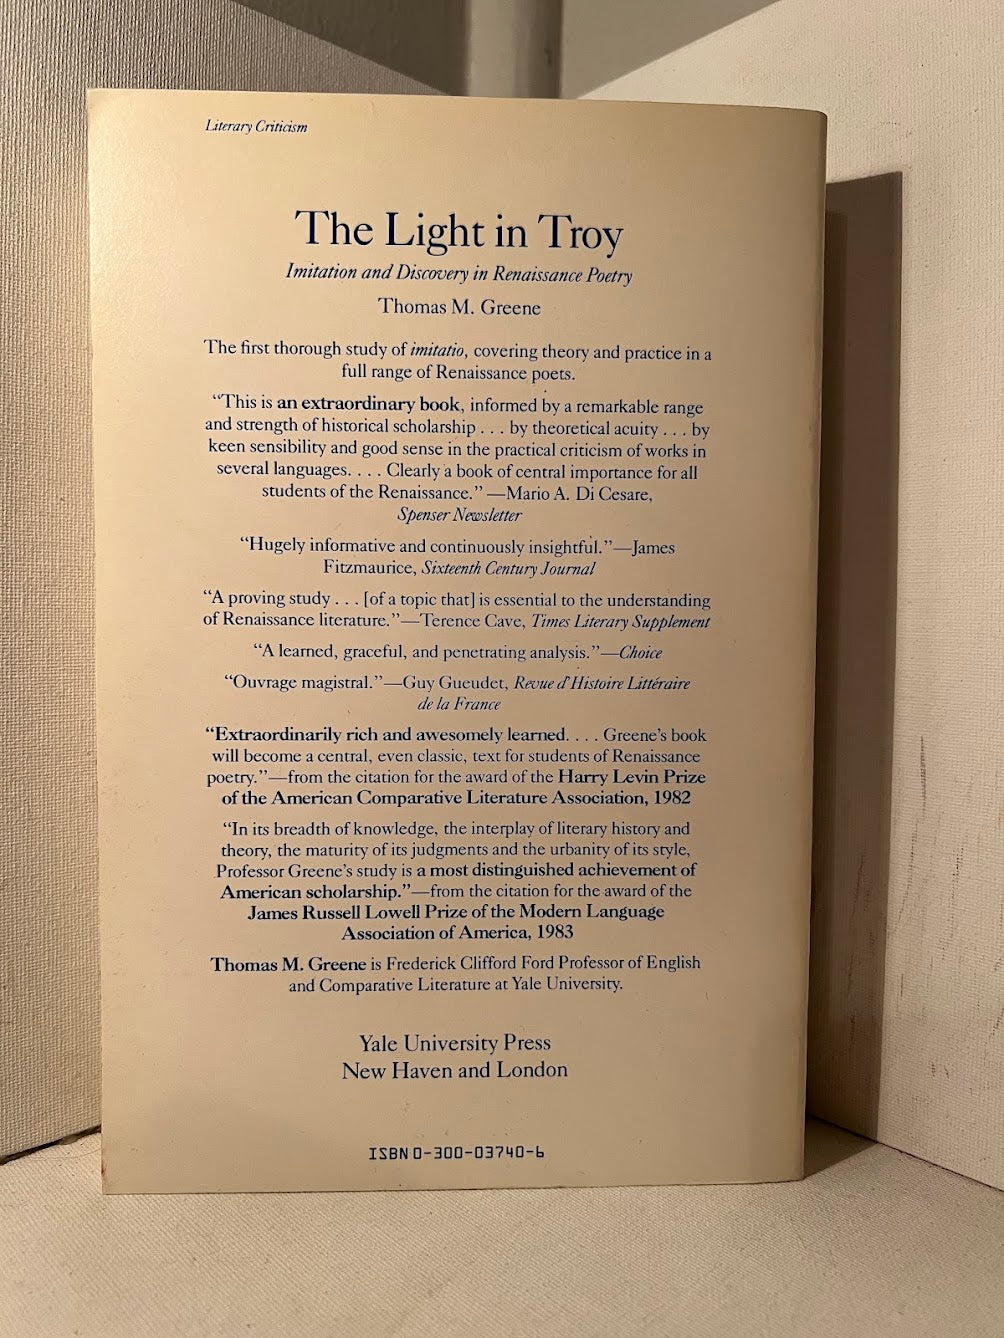 The Light in Troy - Imitation and Discovery in Renaissance Poetry by Thomas M. Greene